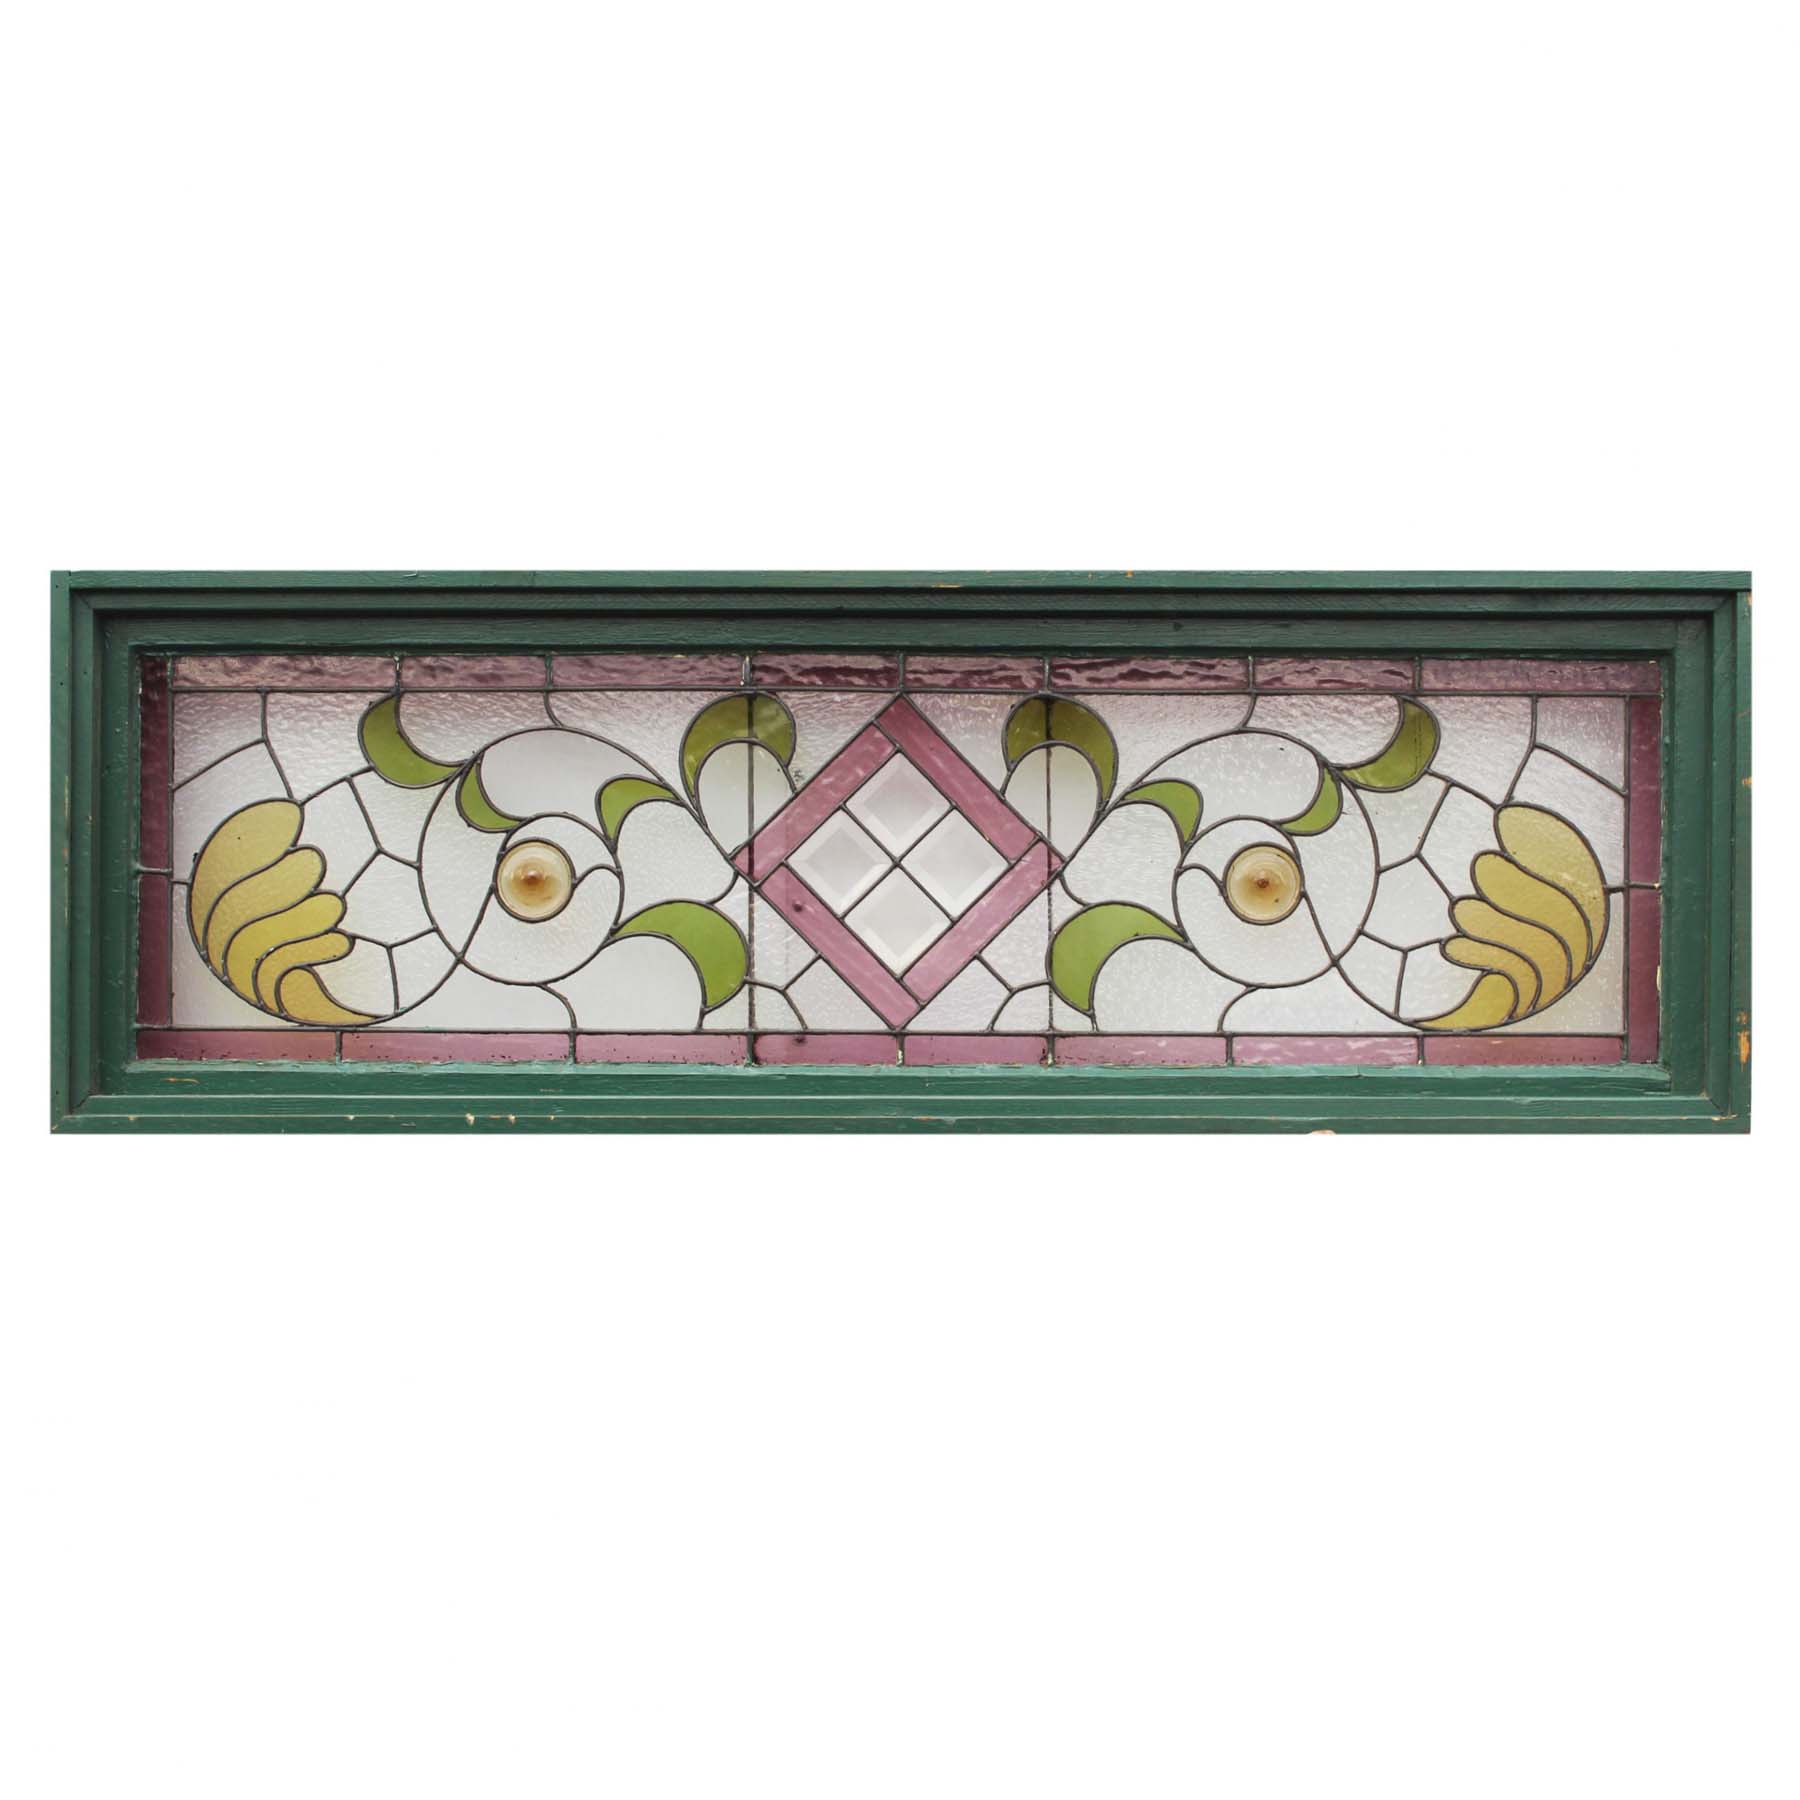 Antique American Stained Glass Window Early 1900s